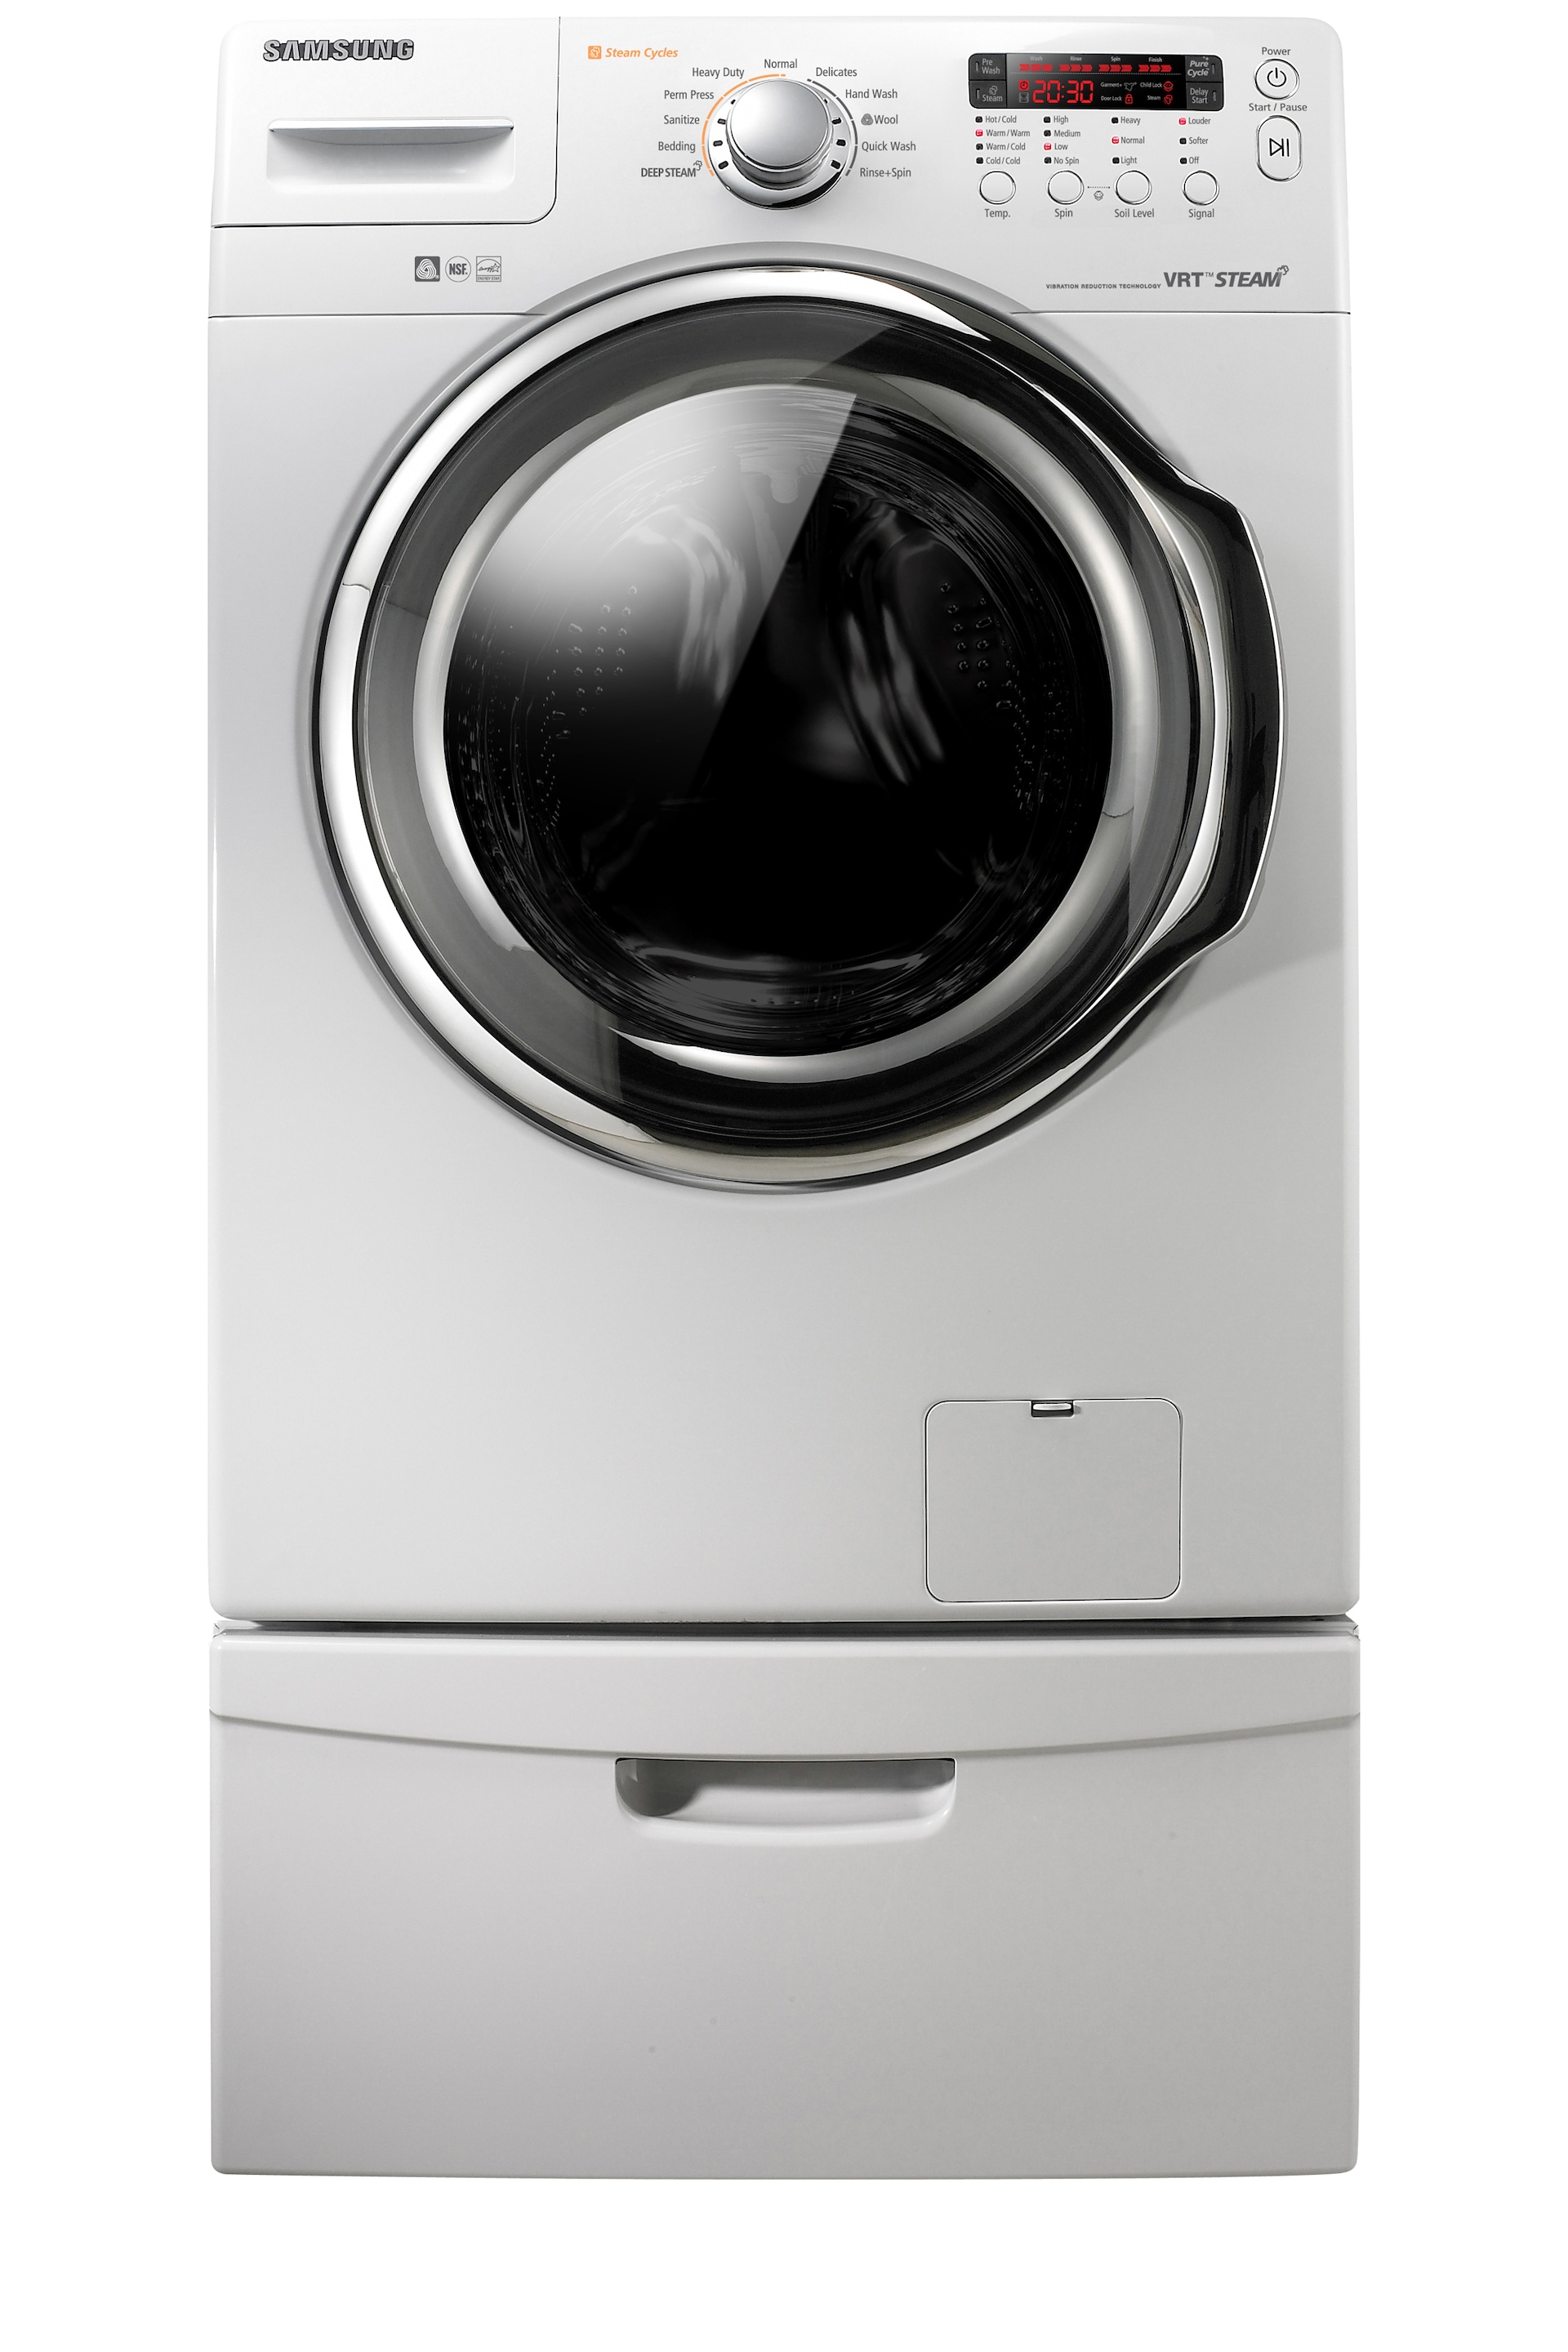 WF331ANW 4.3 cu. ft. Front Load Washer White | SAMSUNG Canada2000 x 3000